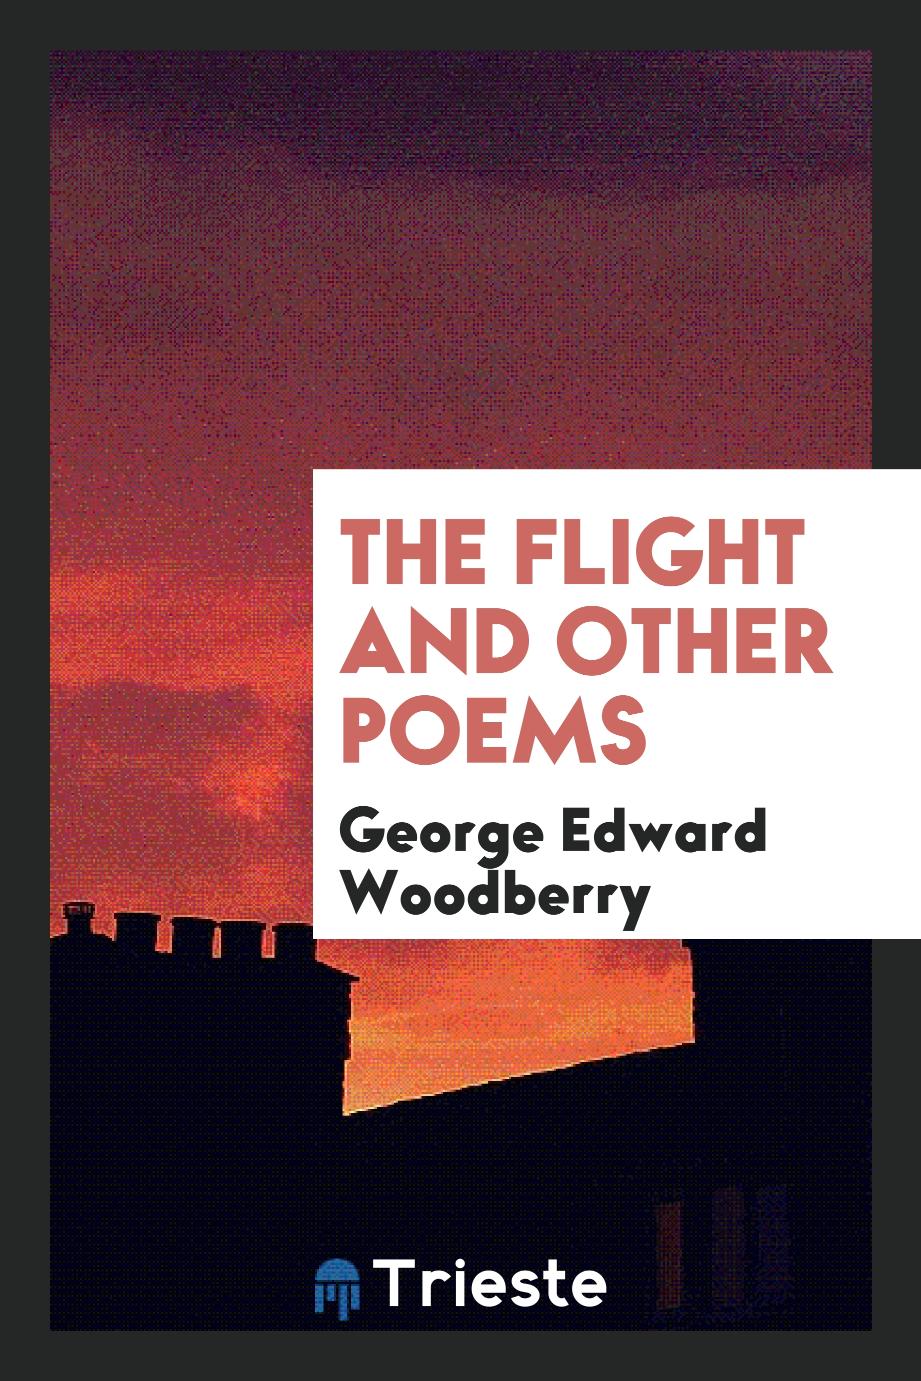 The Flight and Other Poems